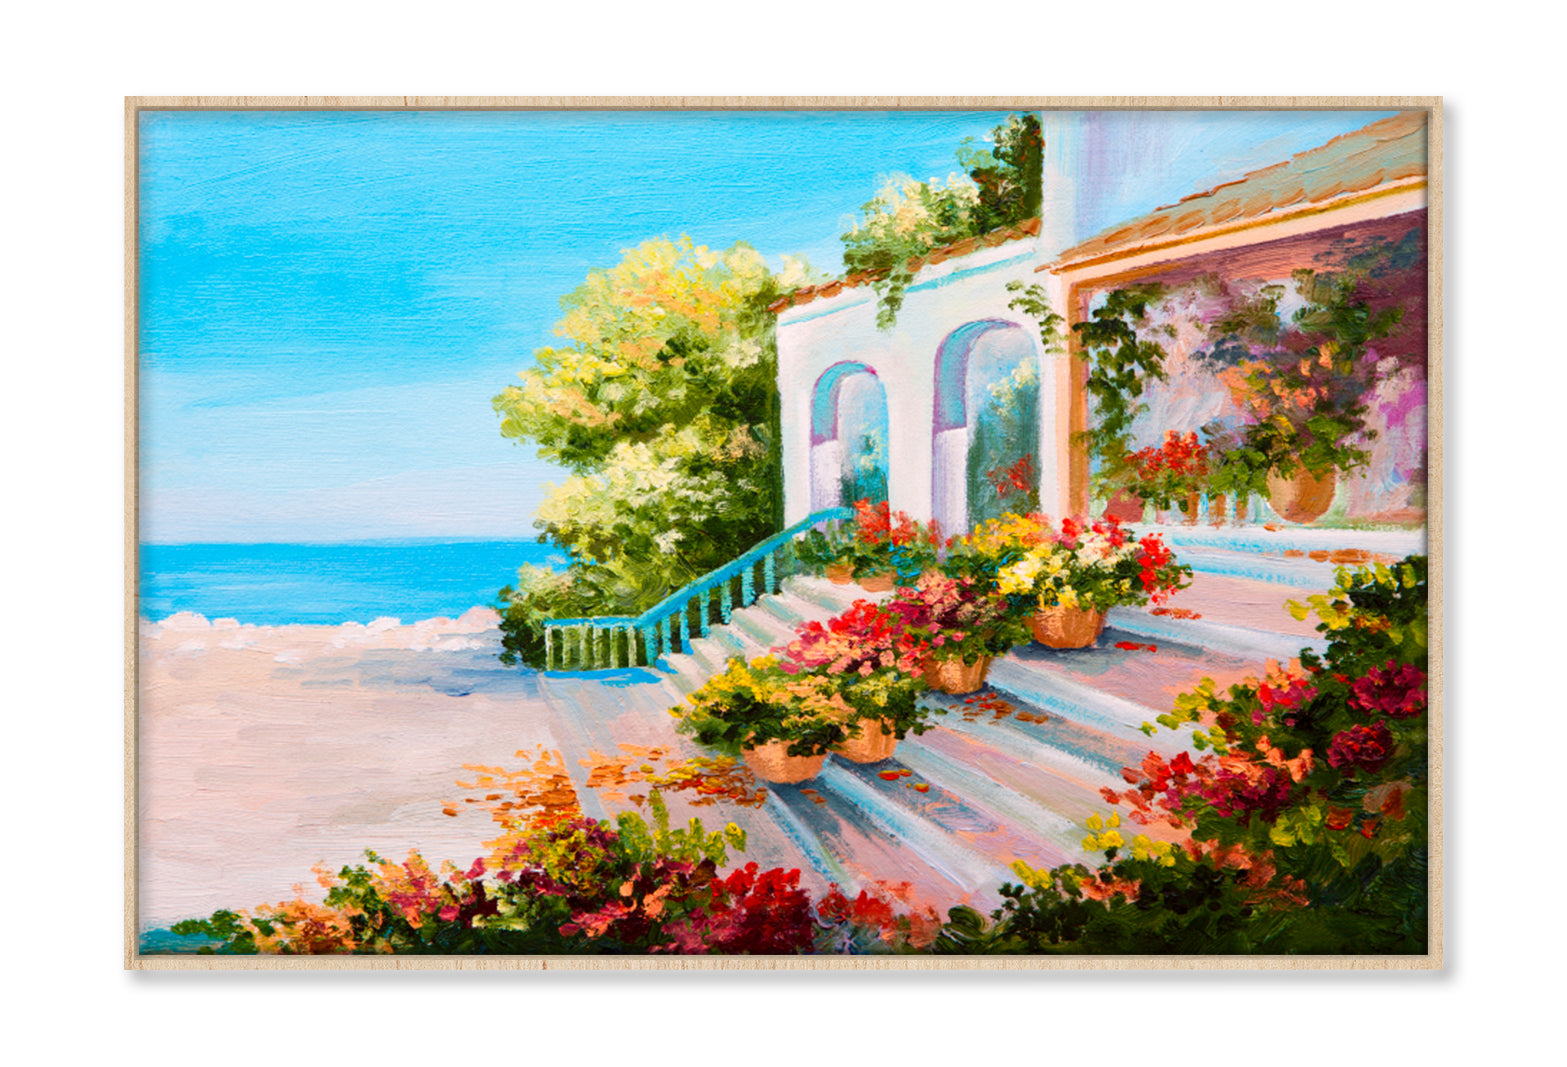 Terrace Near The Sea Oil Painting Wall Art Limited Edition High Quality Print Canvas Box Framed Natural